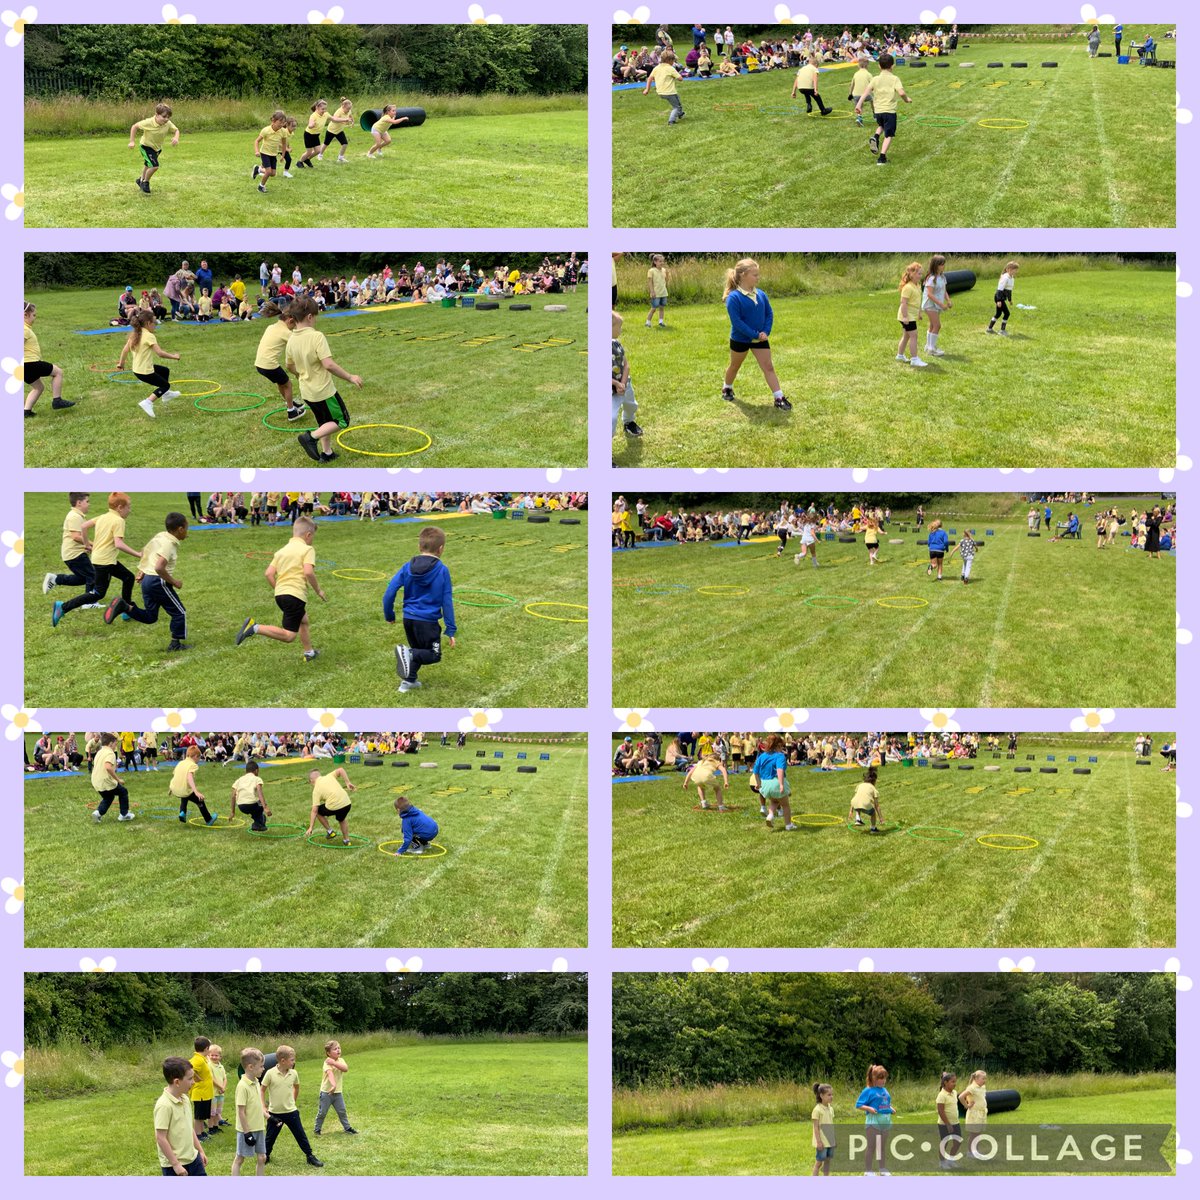 We have had an absolutely fantastic time at sports day today, diolch to everyone who came and took part! We had a lovely time doing our races, obstacle courses and welly throwing/potato and spoon race. Arddechog Dosbarth Gwyrdd! #ProudToBeRyF #HealthyHarri